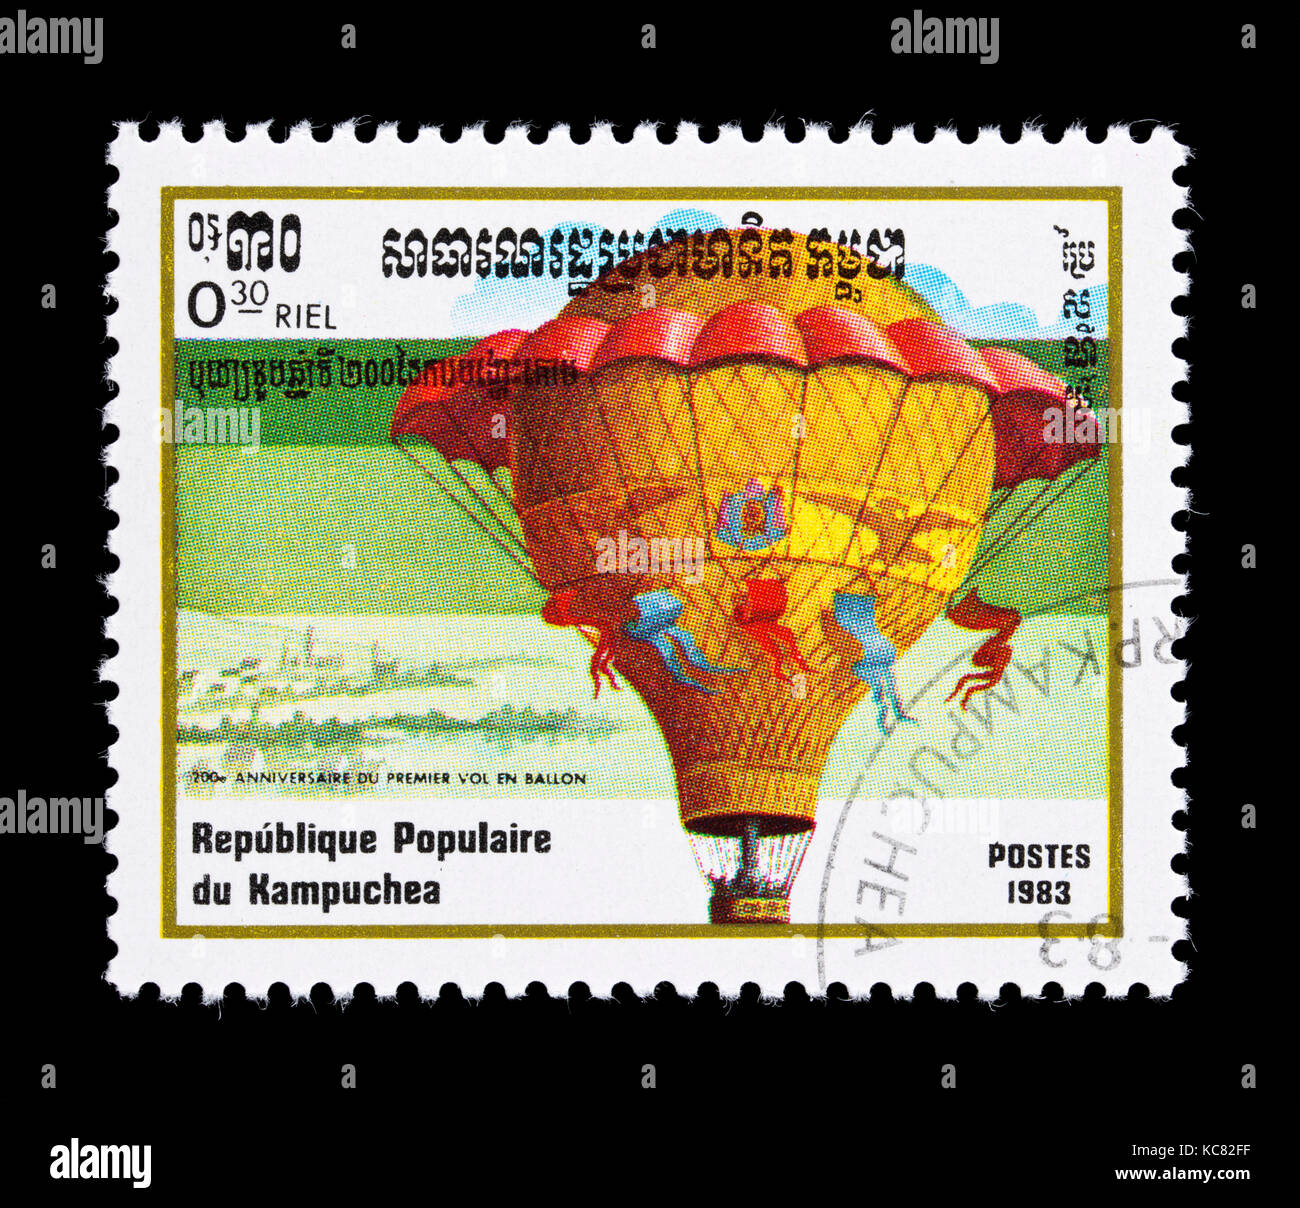 Postage stamp from Cambodia (Kampuchea) depicting Ville d'Orleans,, bicentennial of first hot air balloon flight. Stock Photo